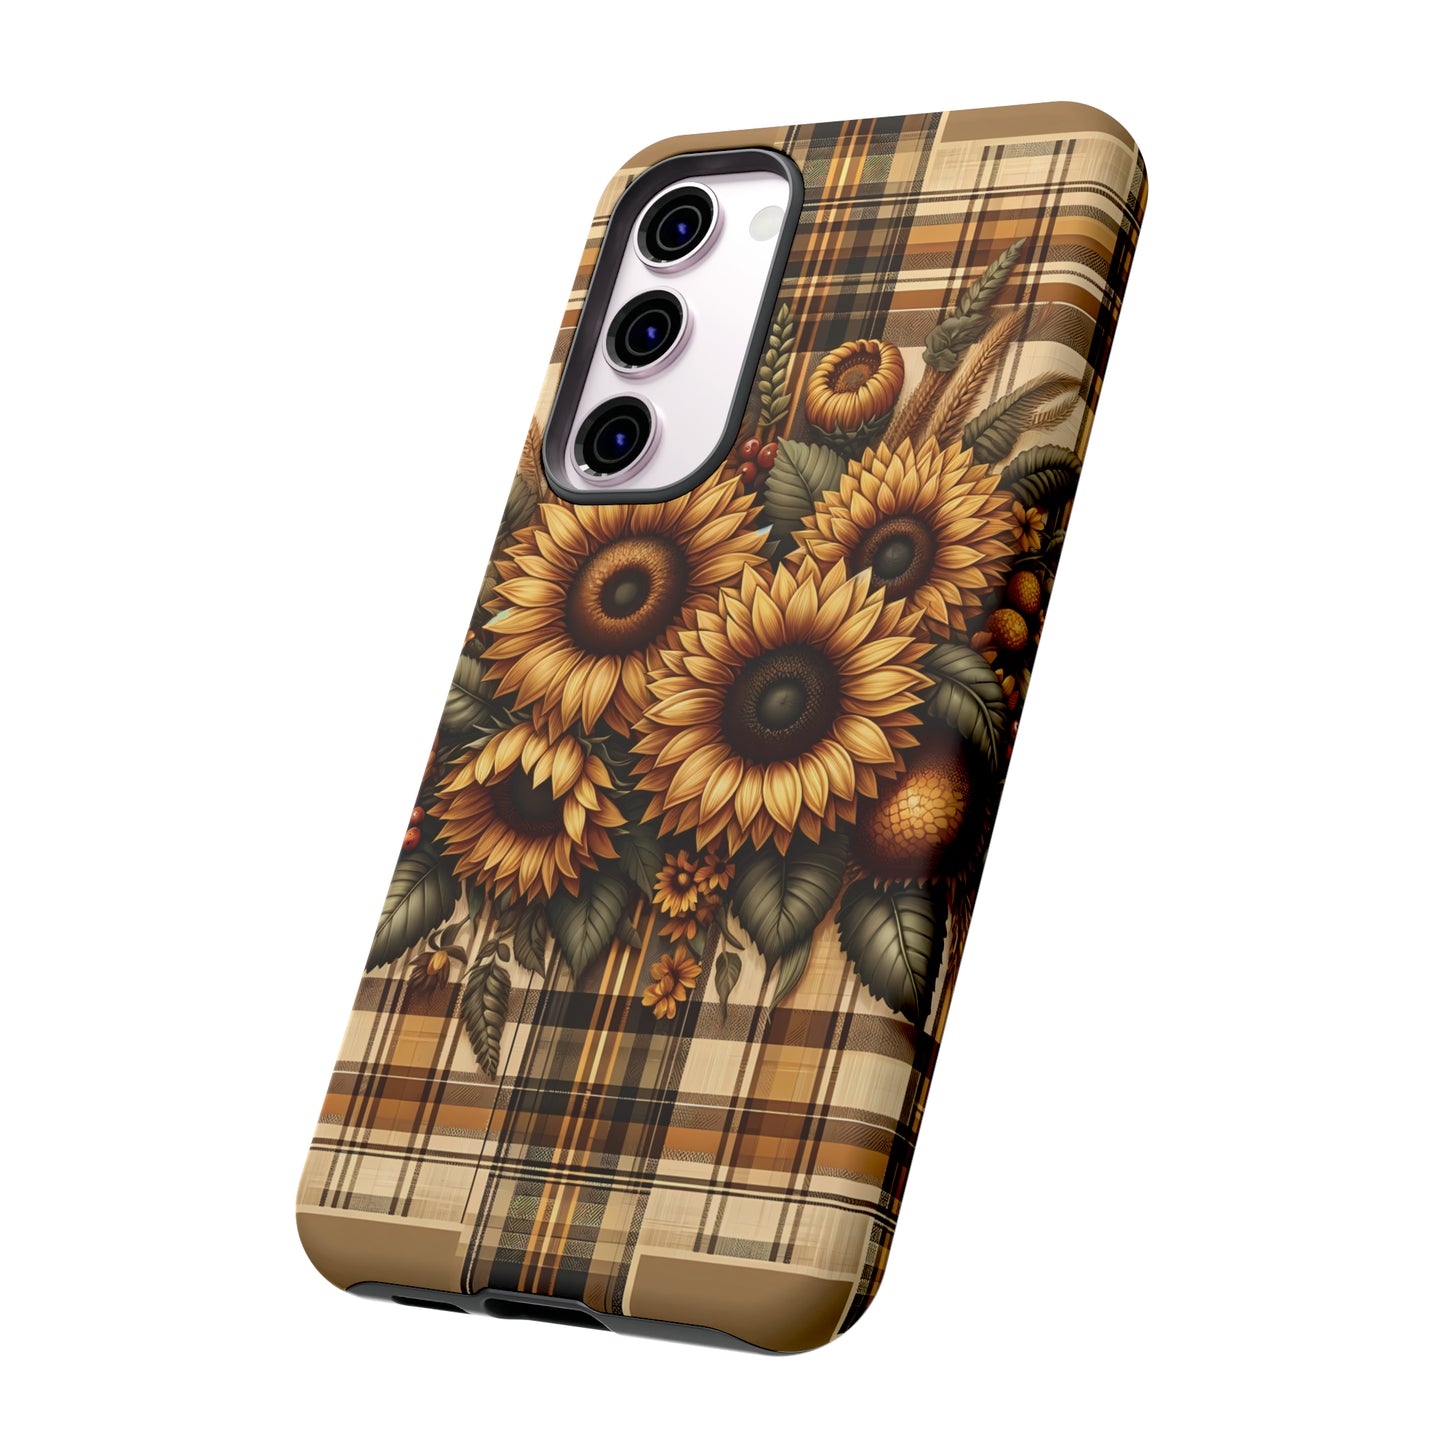 Country Sunflower Phone Case - Harvest Hues - Vintage Style Sunflower Plaid Phone Cover for iPhone, Samsung Galaxy , & Google Series.